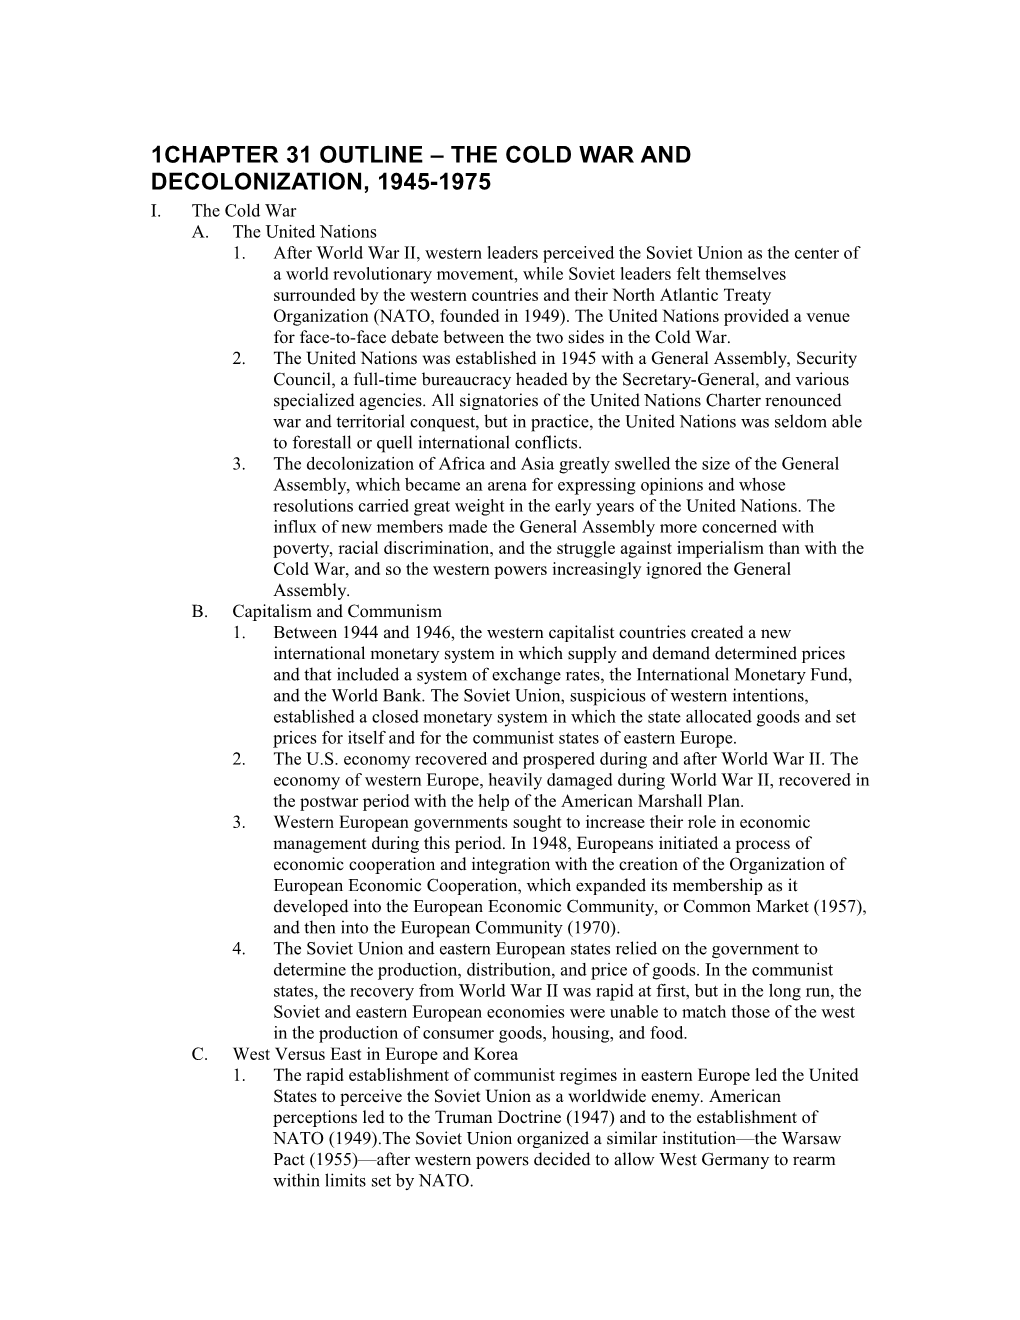 CHAPTER 31 OUTLINE the Cold War and Decolonization, 1945-1975